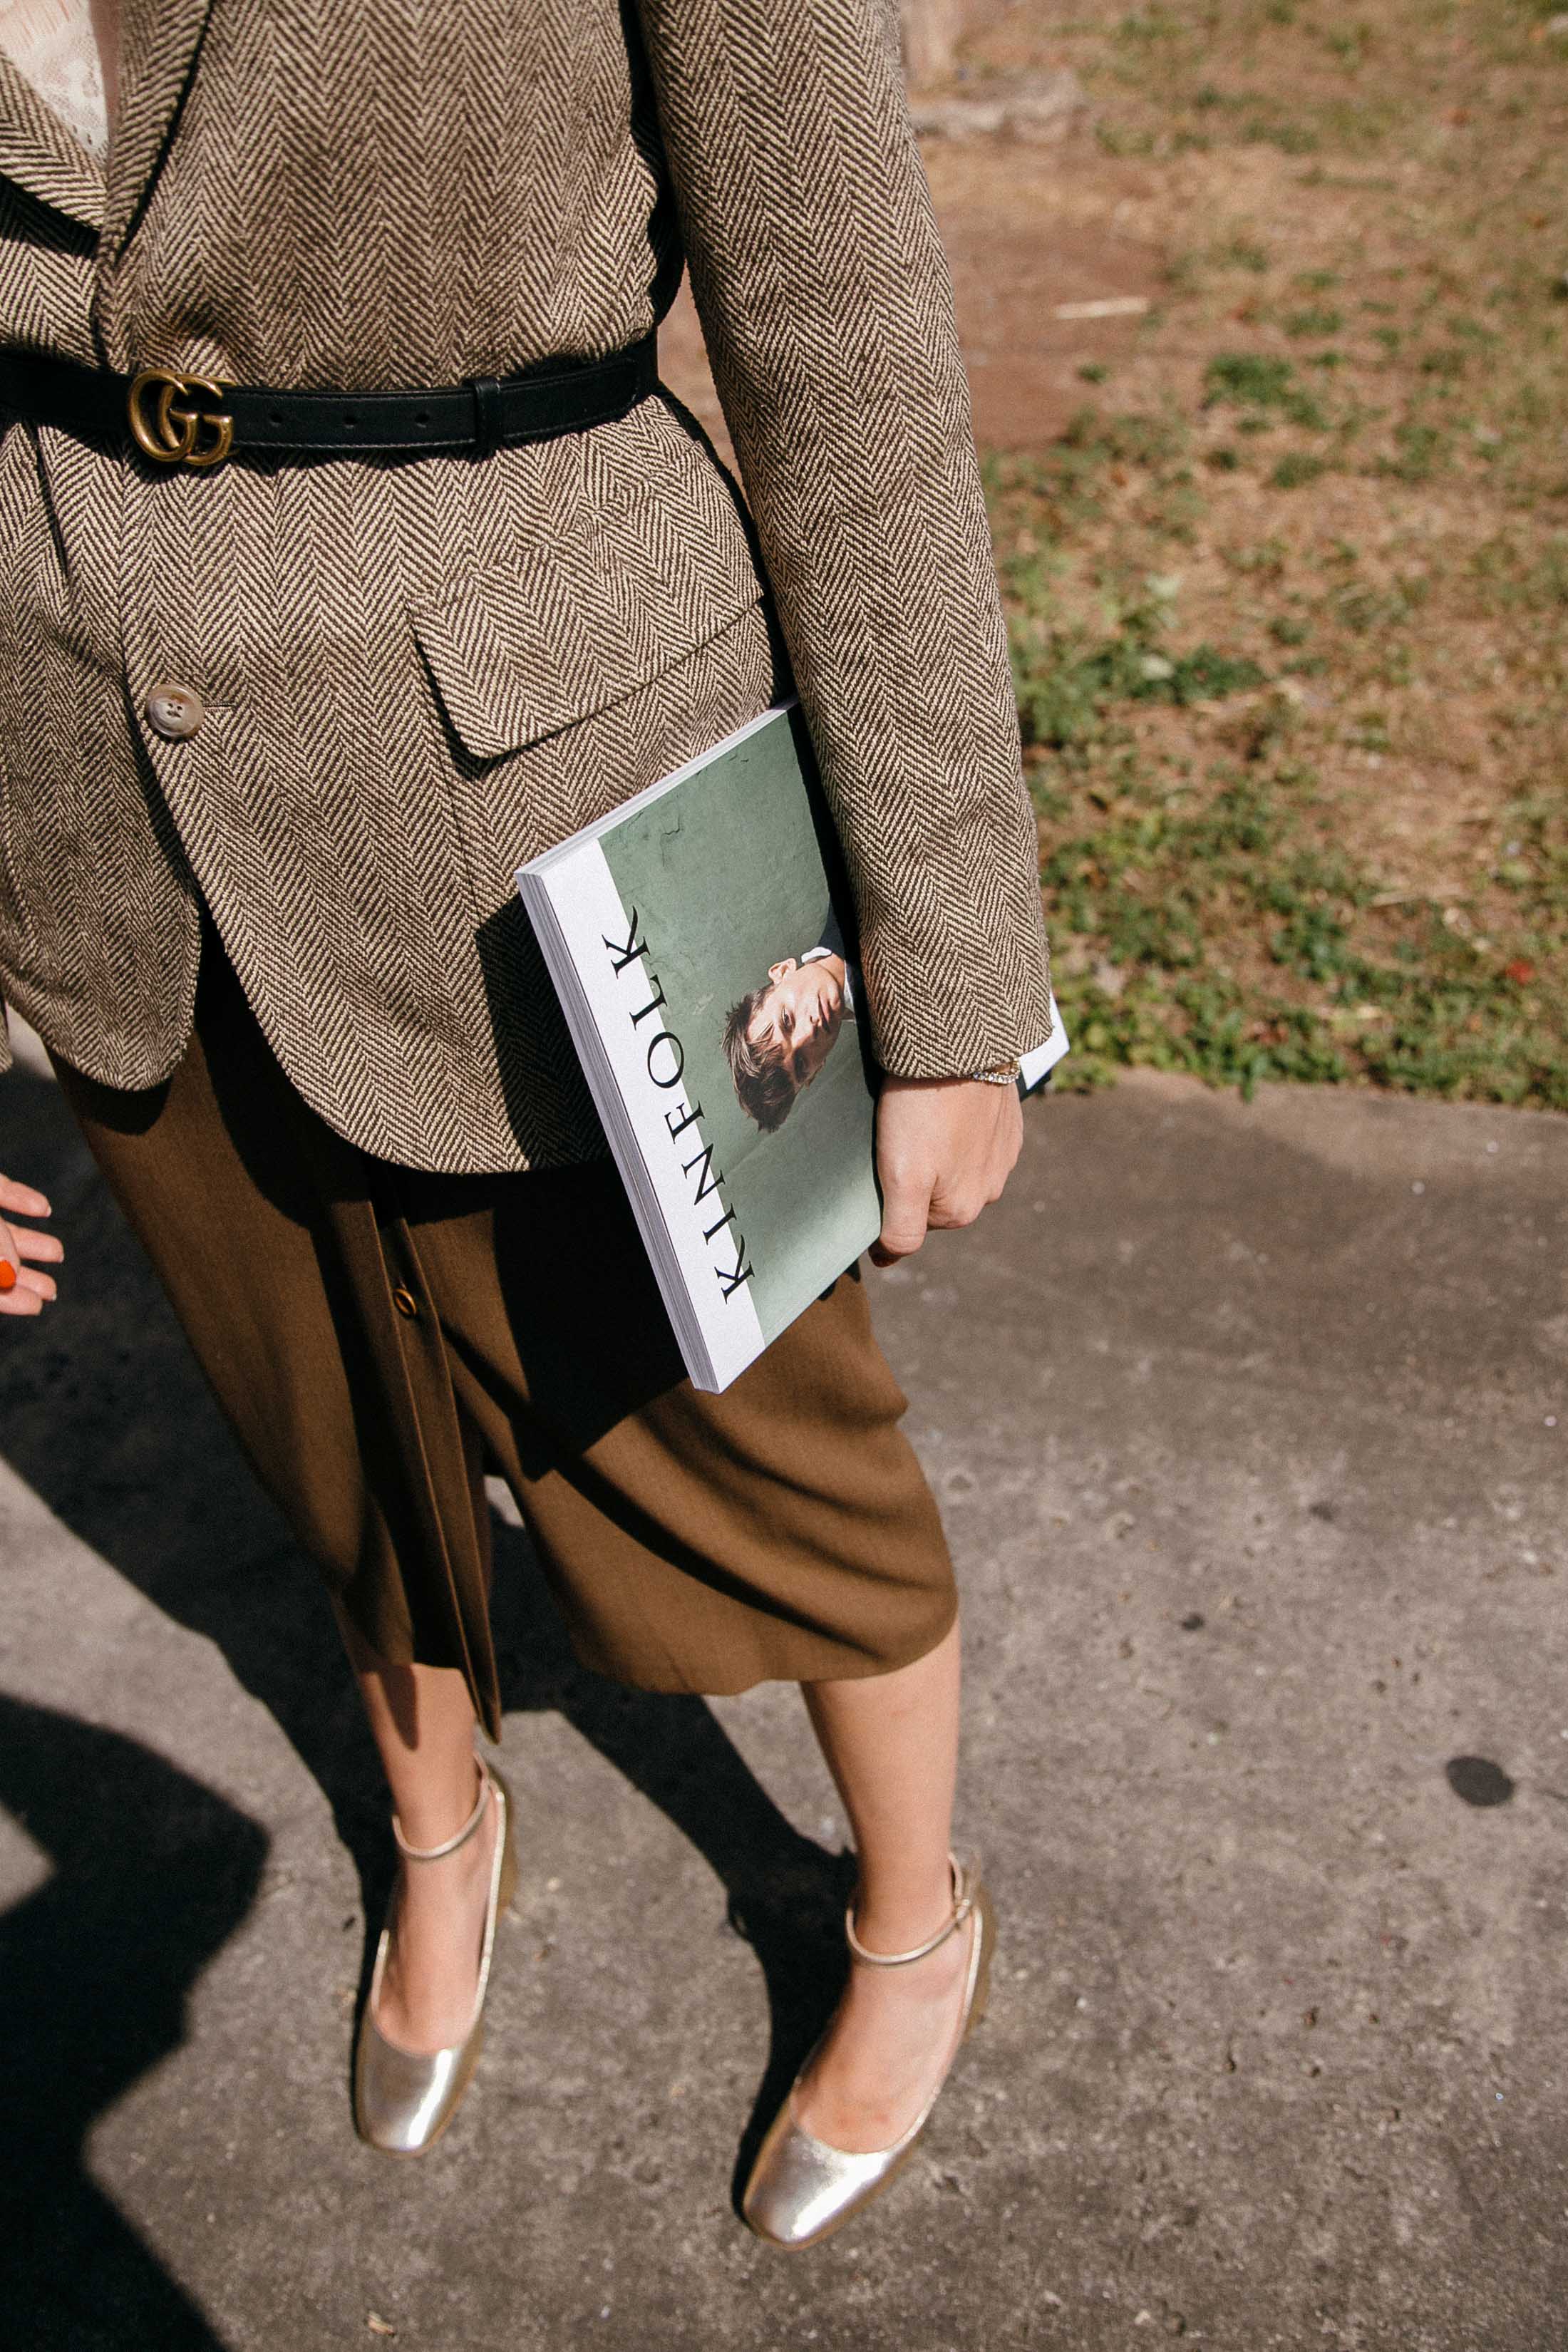 Gucci double G skinny black leather belt, Ralph Lauren wool blazer, Max Mara button front pencil skirt and gold shoes